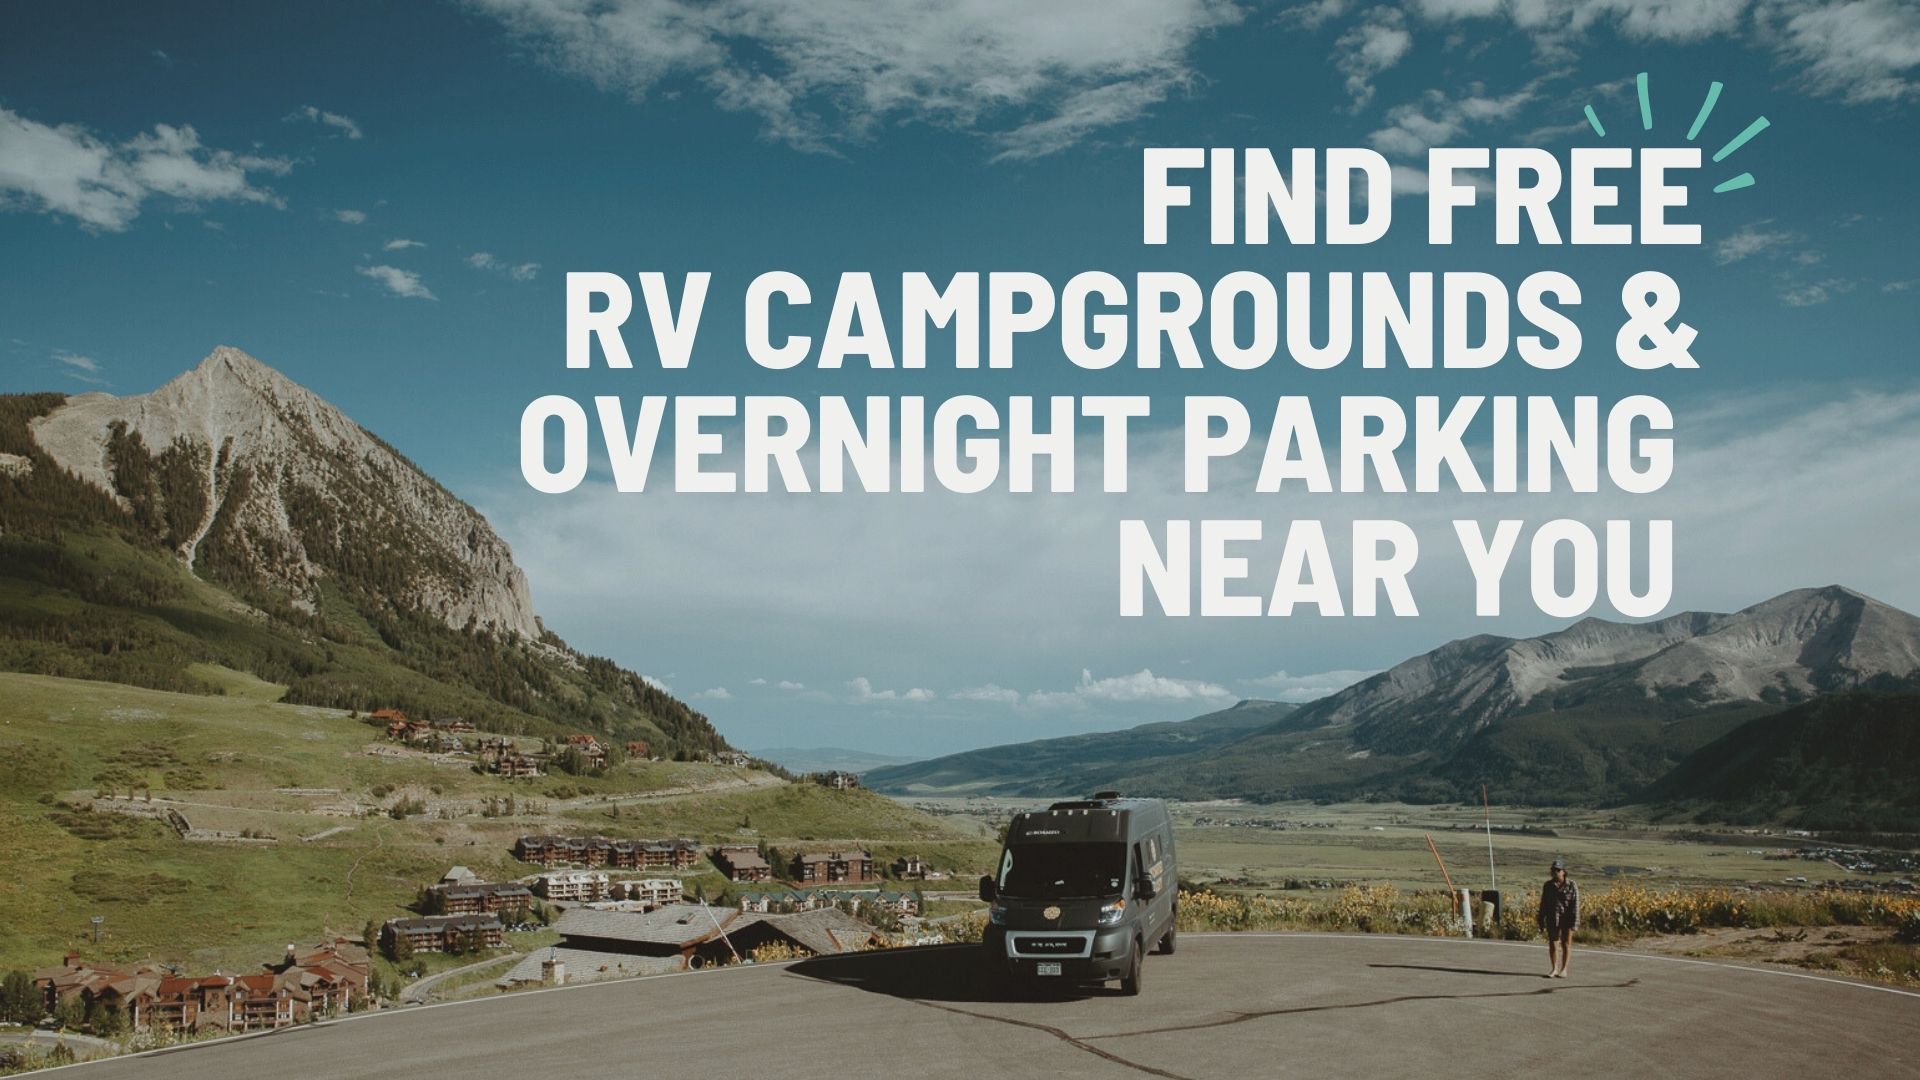 How to Find Free Overnight Parking